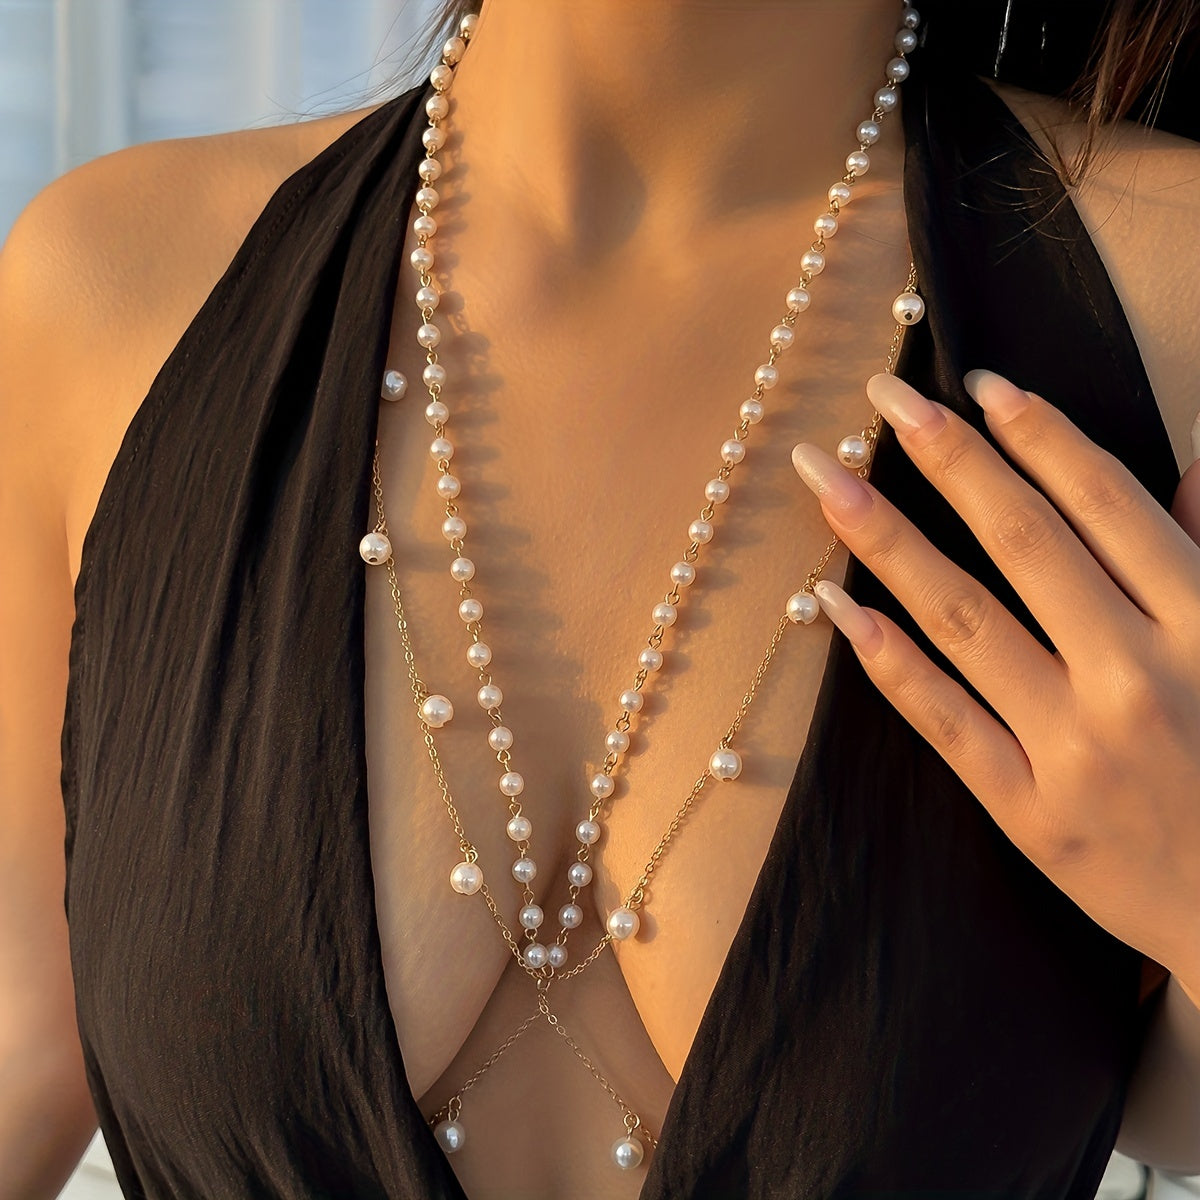 Elevate Your Look with This Elegant Copper Body Chain & Faux Pearls Body Jewelry